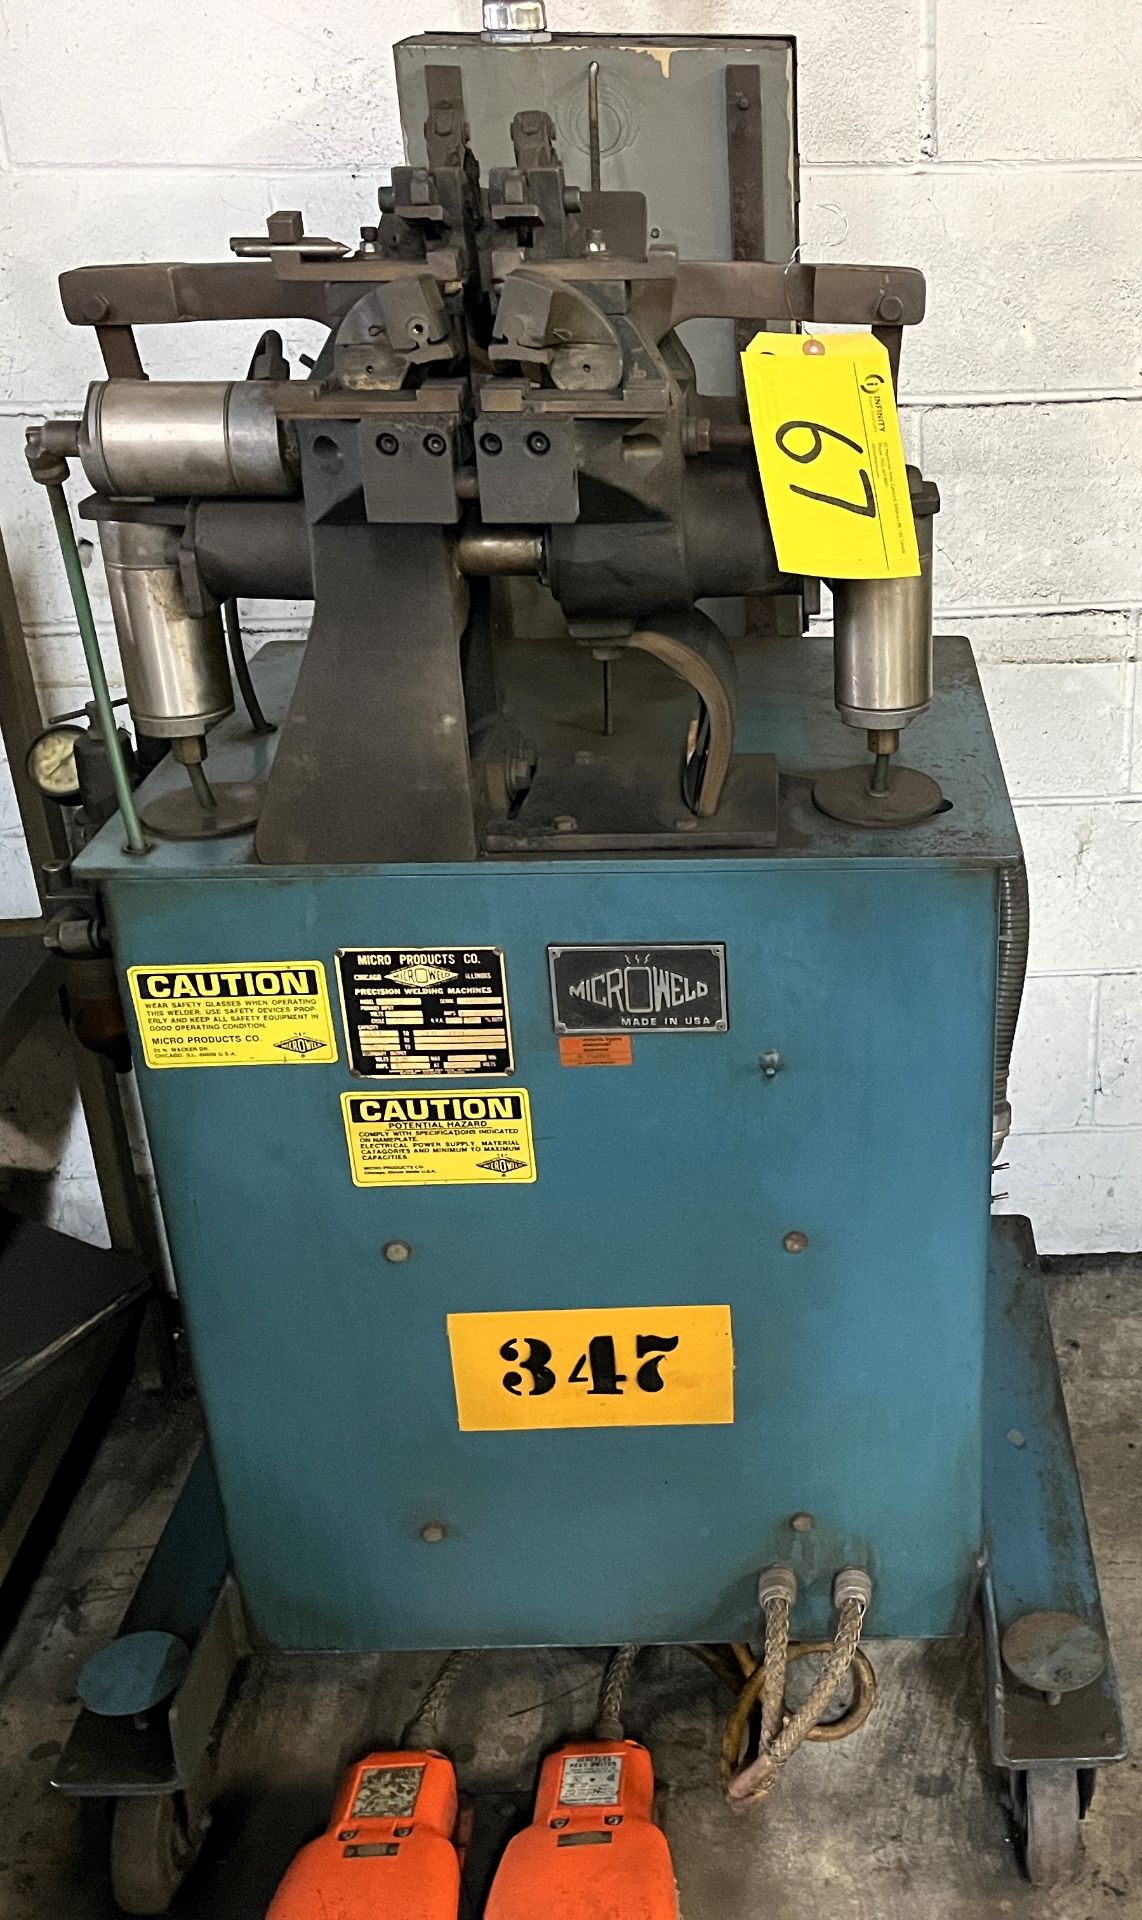 MICRO PRODUCTS RW-3 PRECISION SPOT WELDER, 20 KVA, S/N 32716 (RIGGING FEE $100)